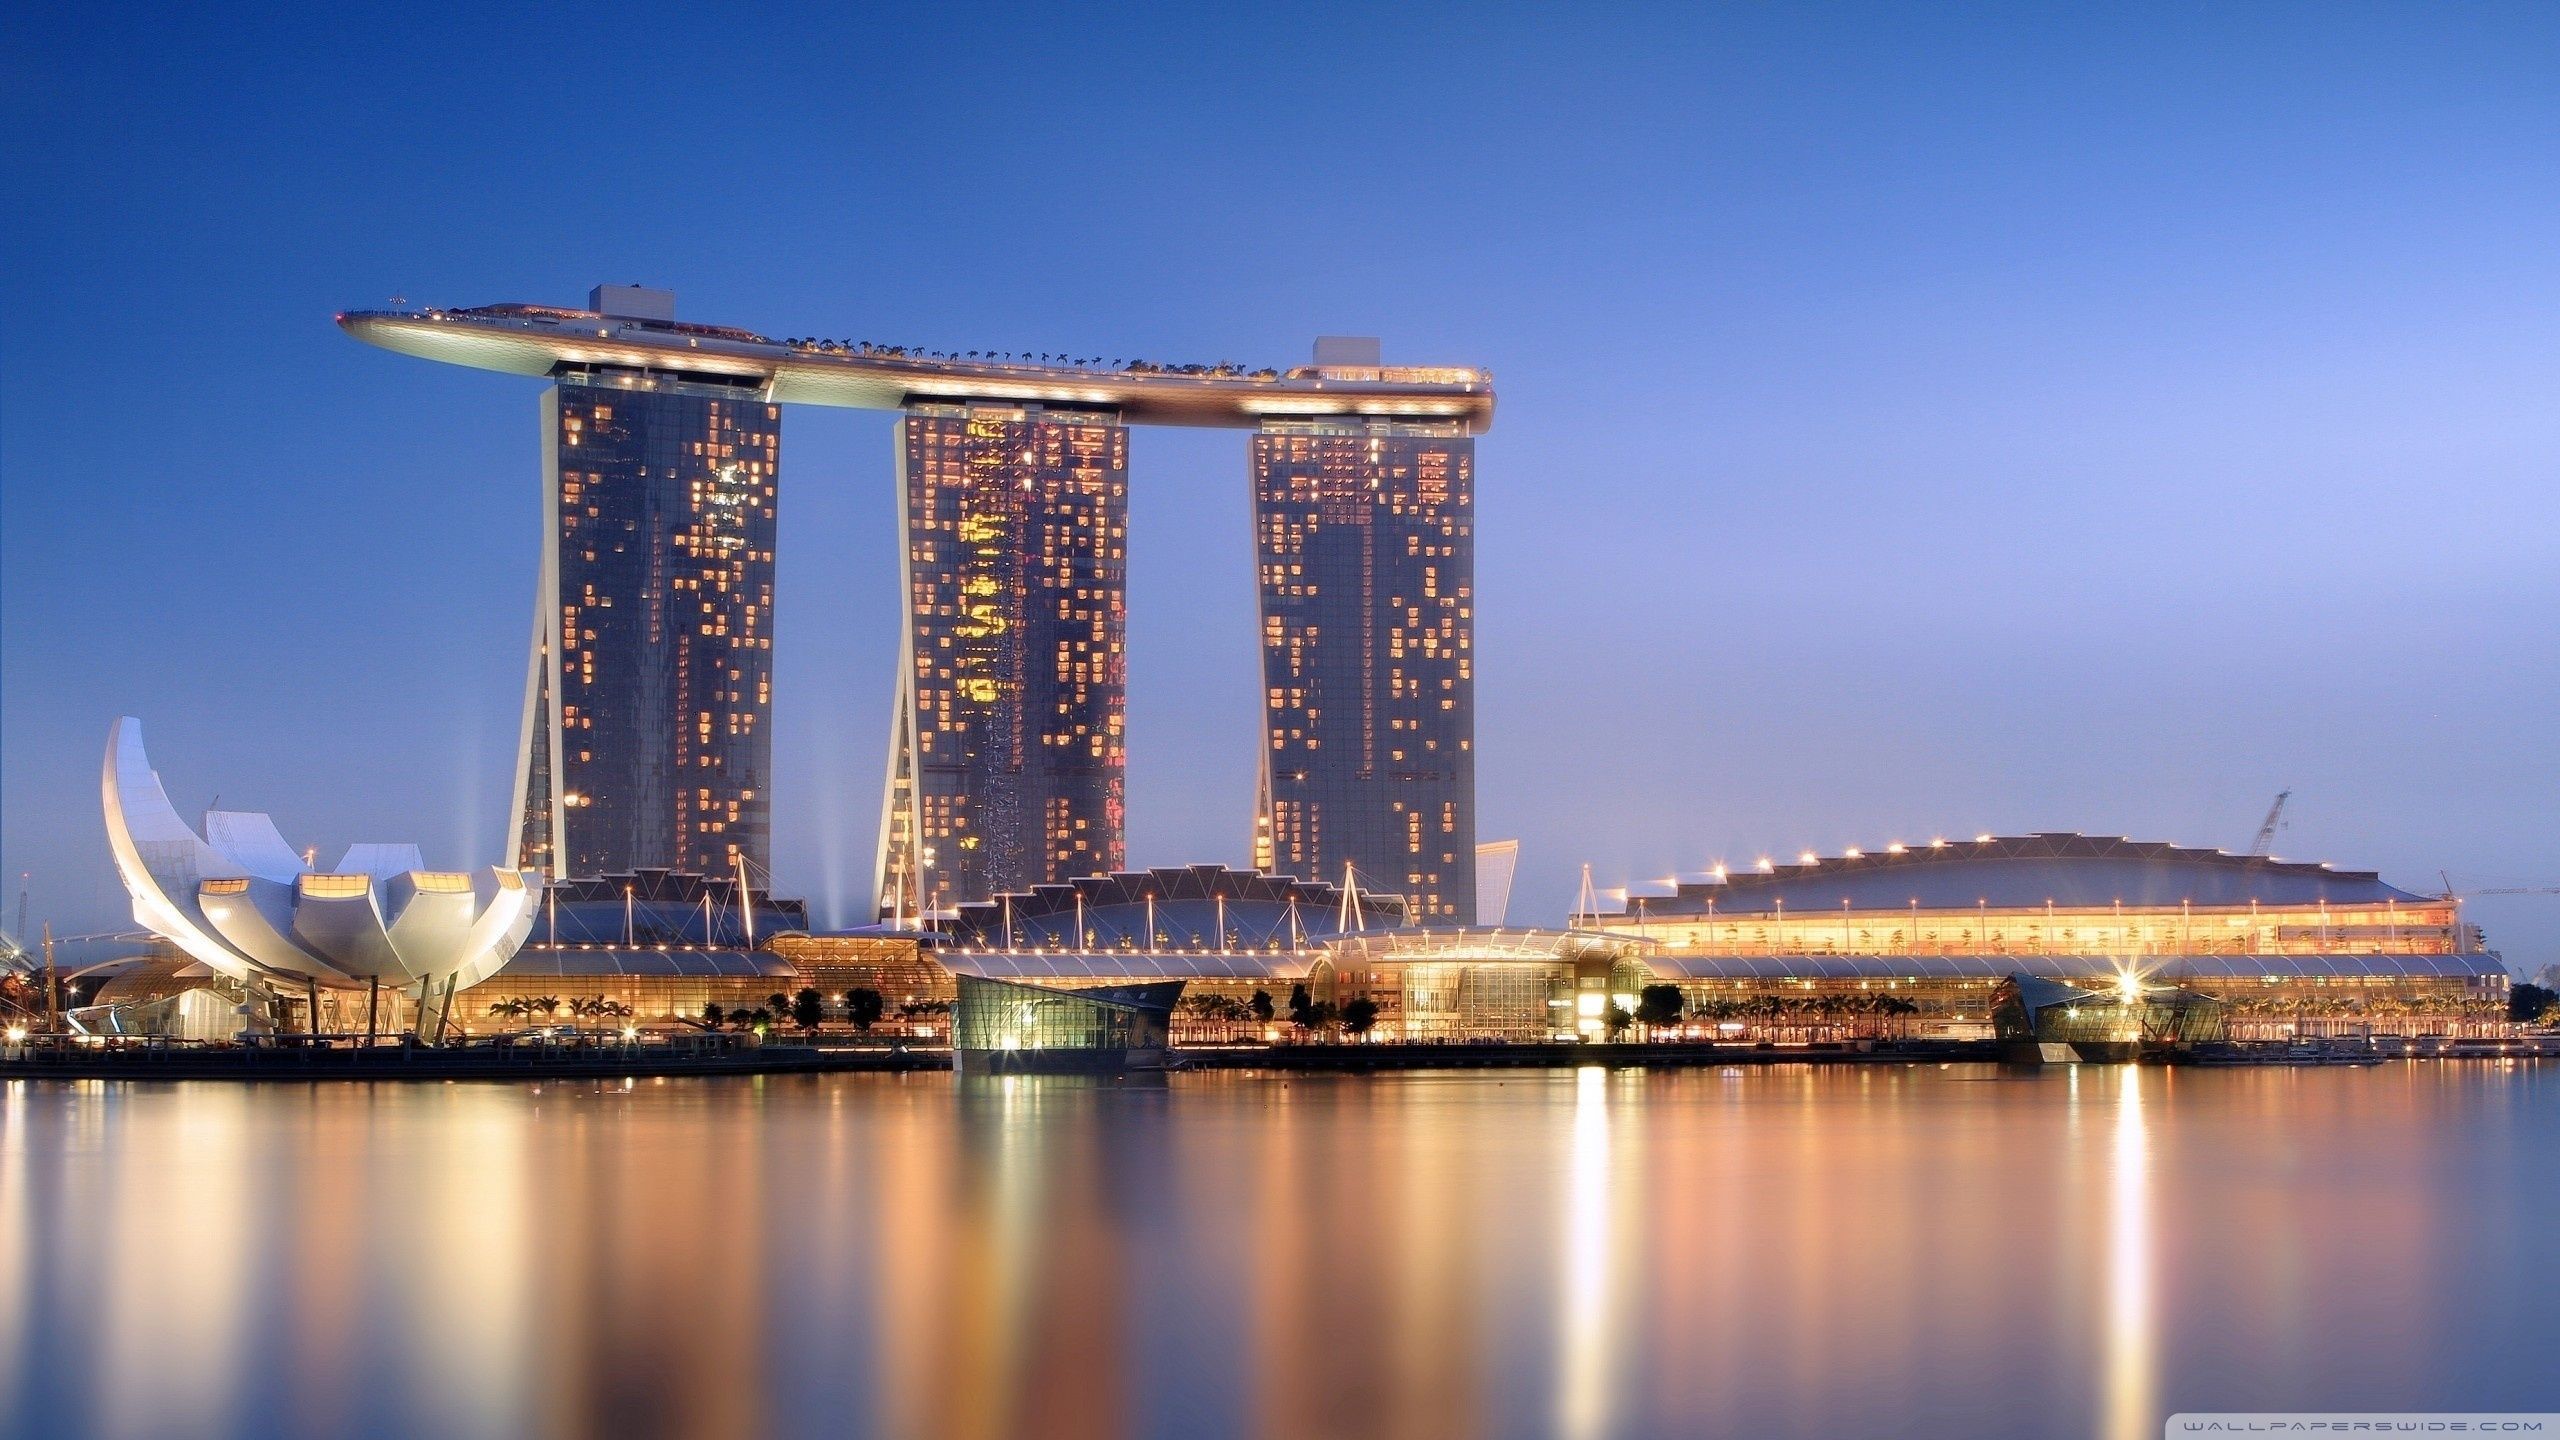 Singapore Day Wallpaper On